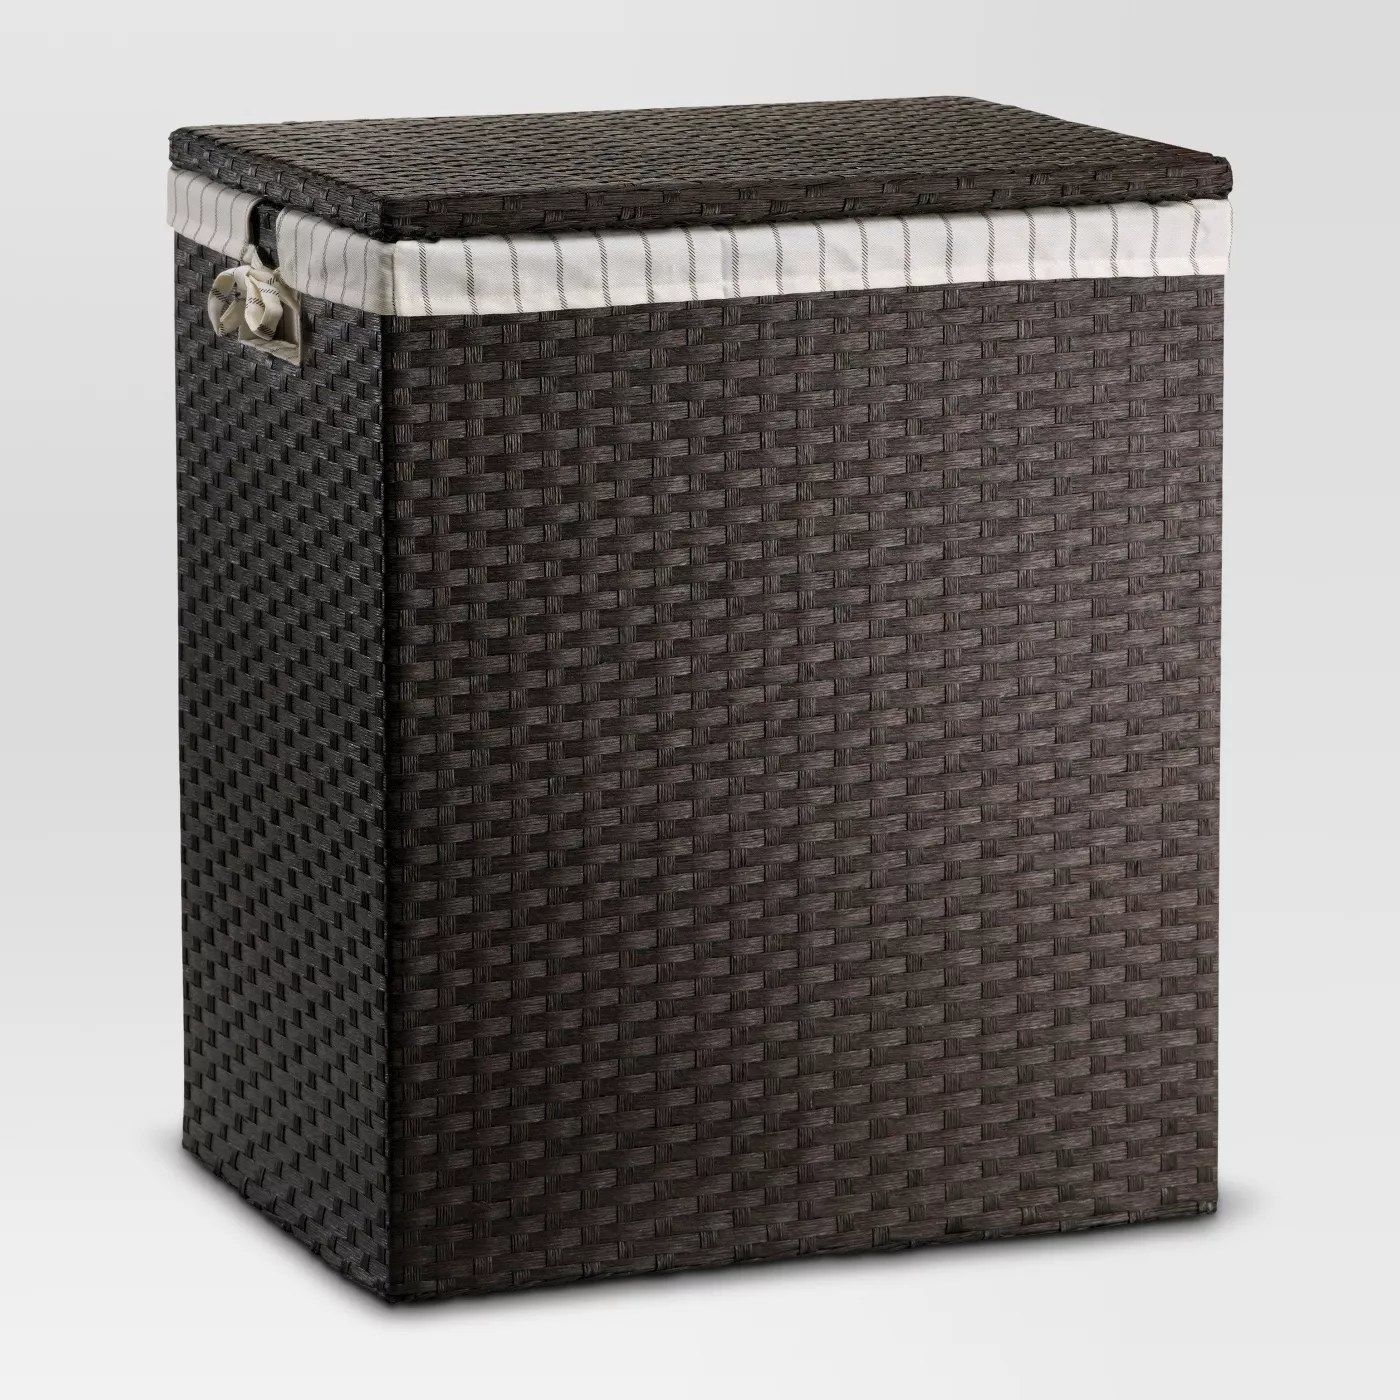 The brown woven hamper with a striped lining inside